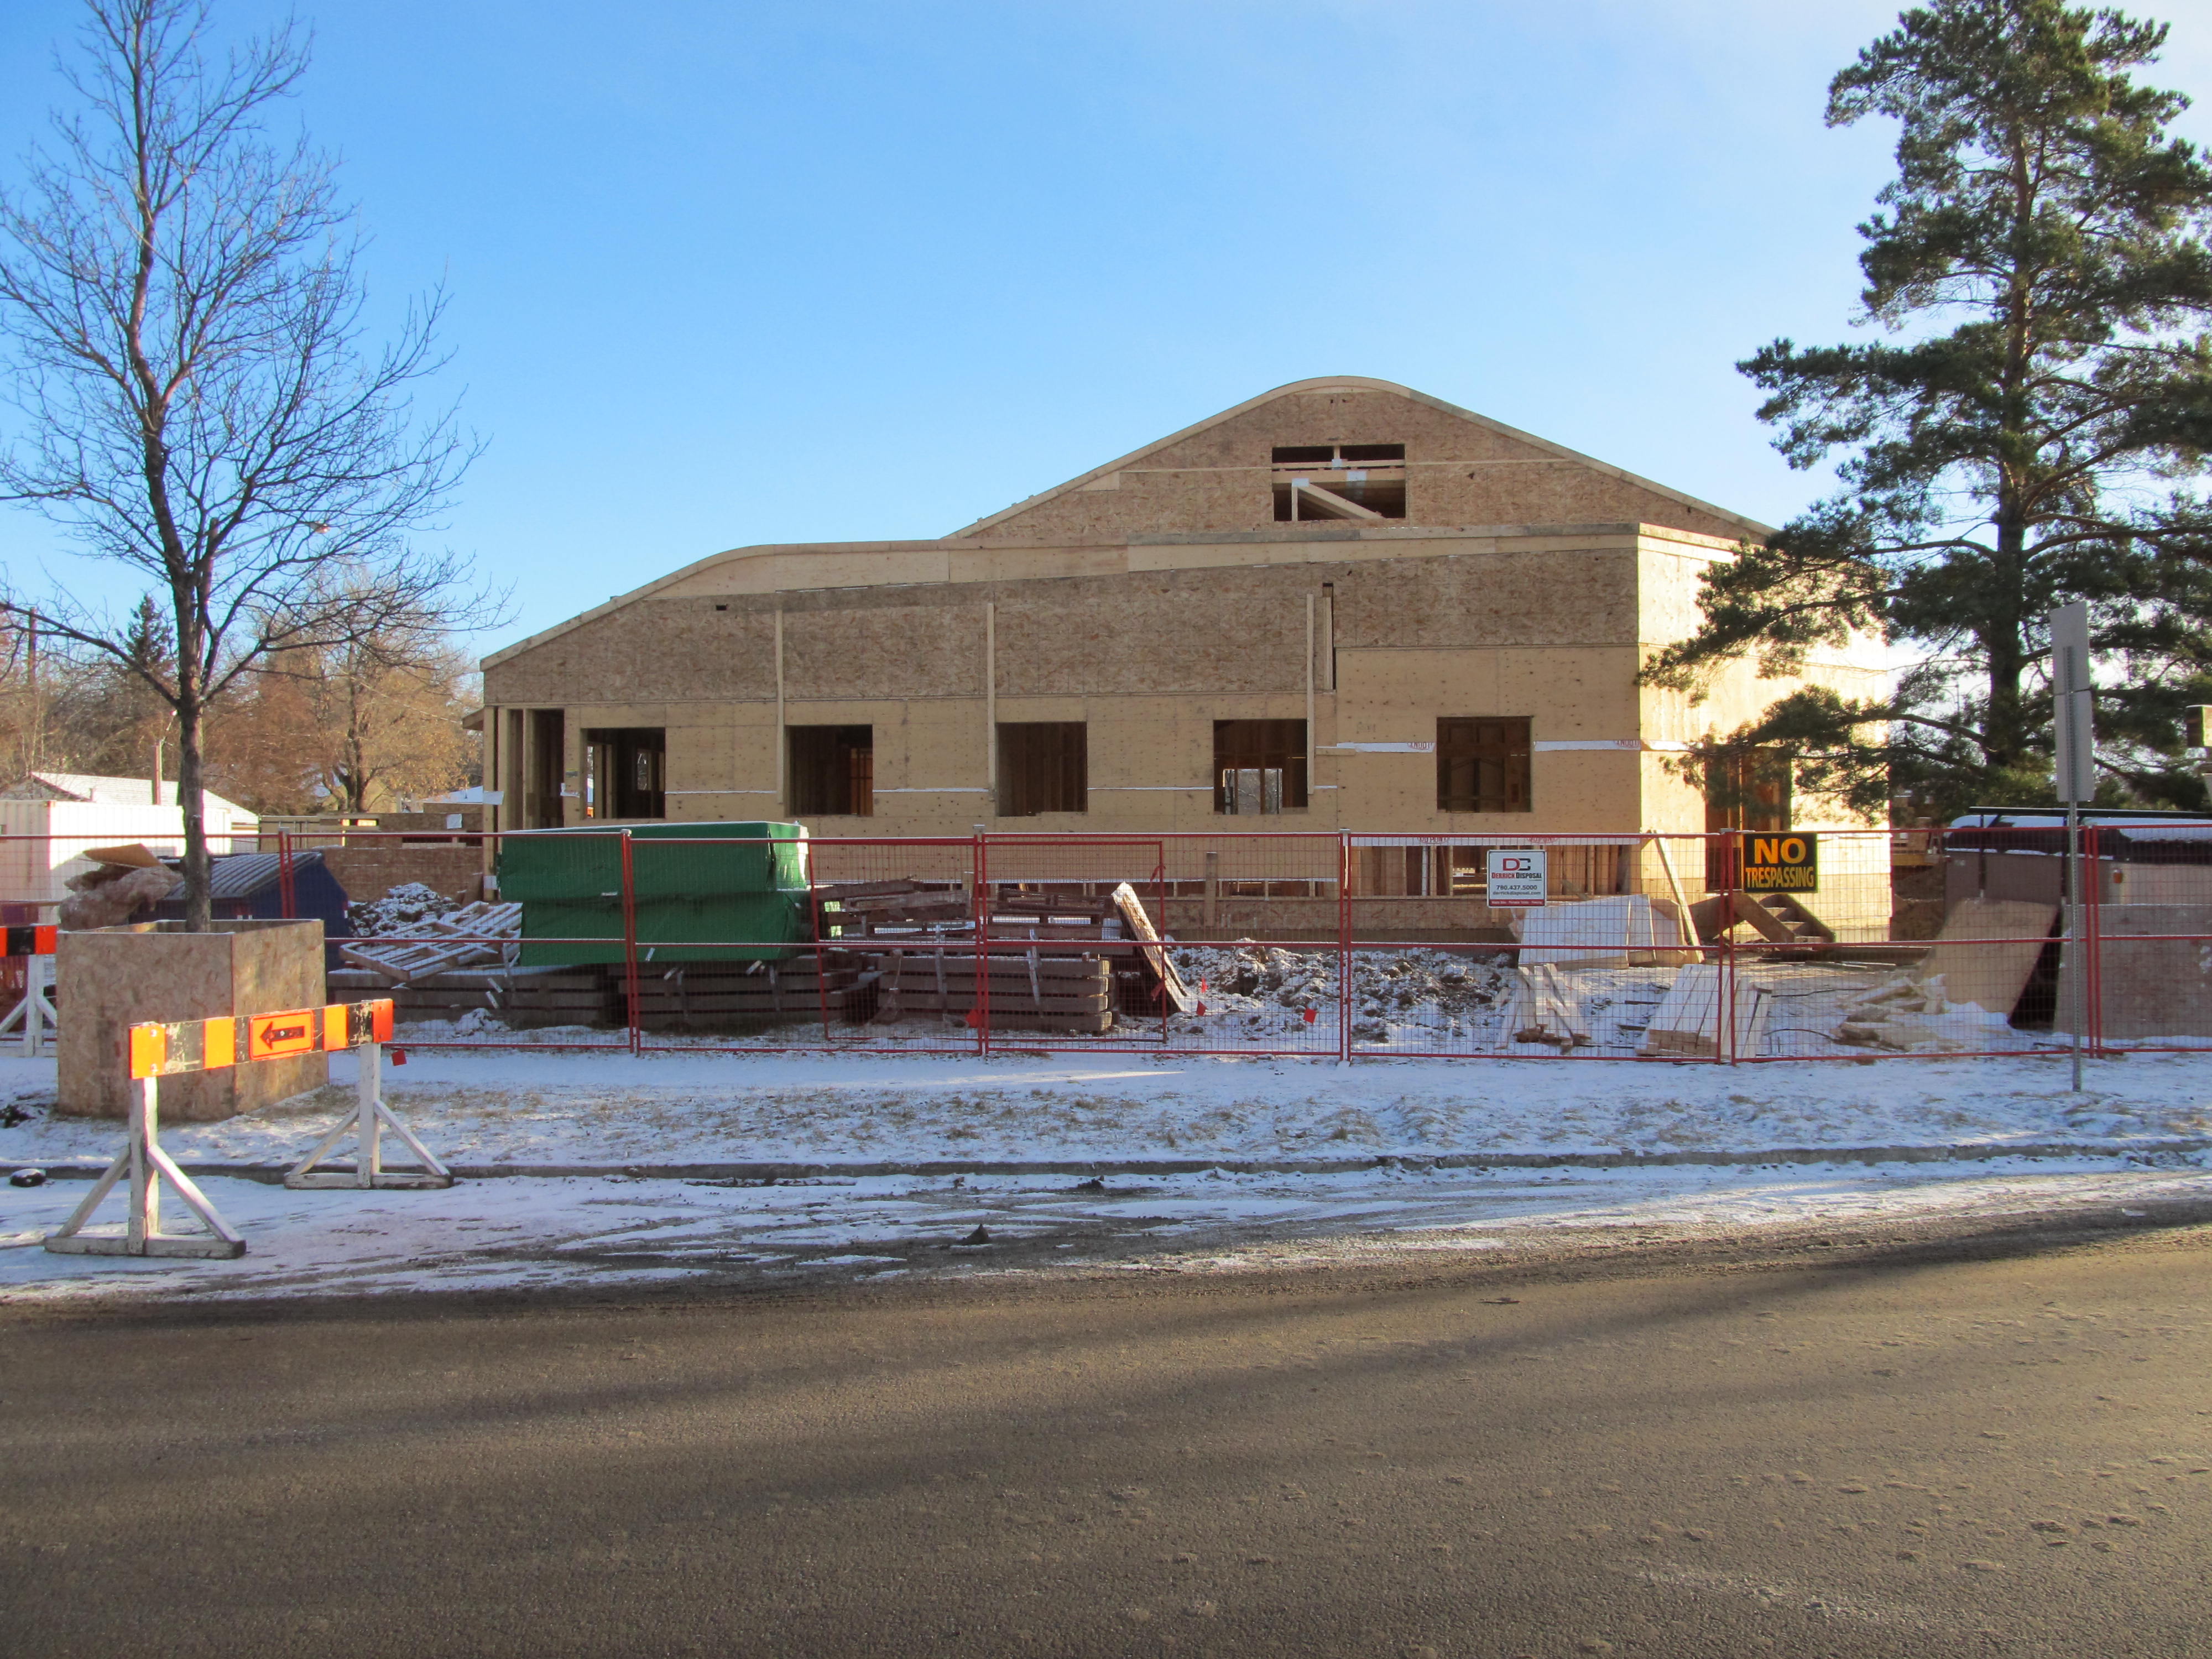 Church/Multi-use building fully enclosed (late December)